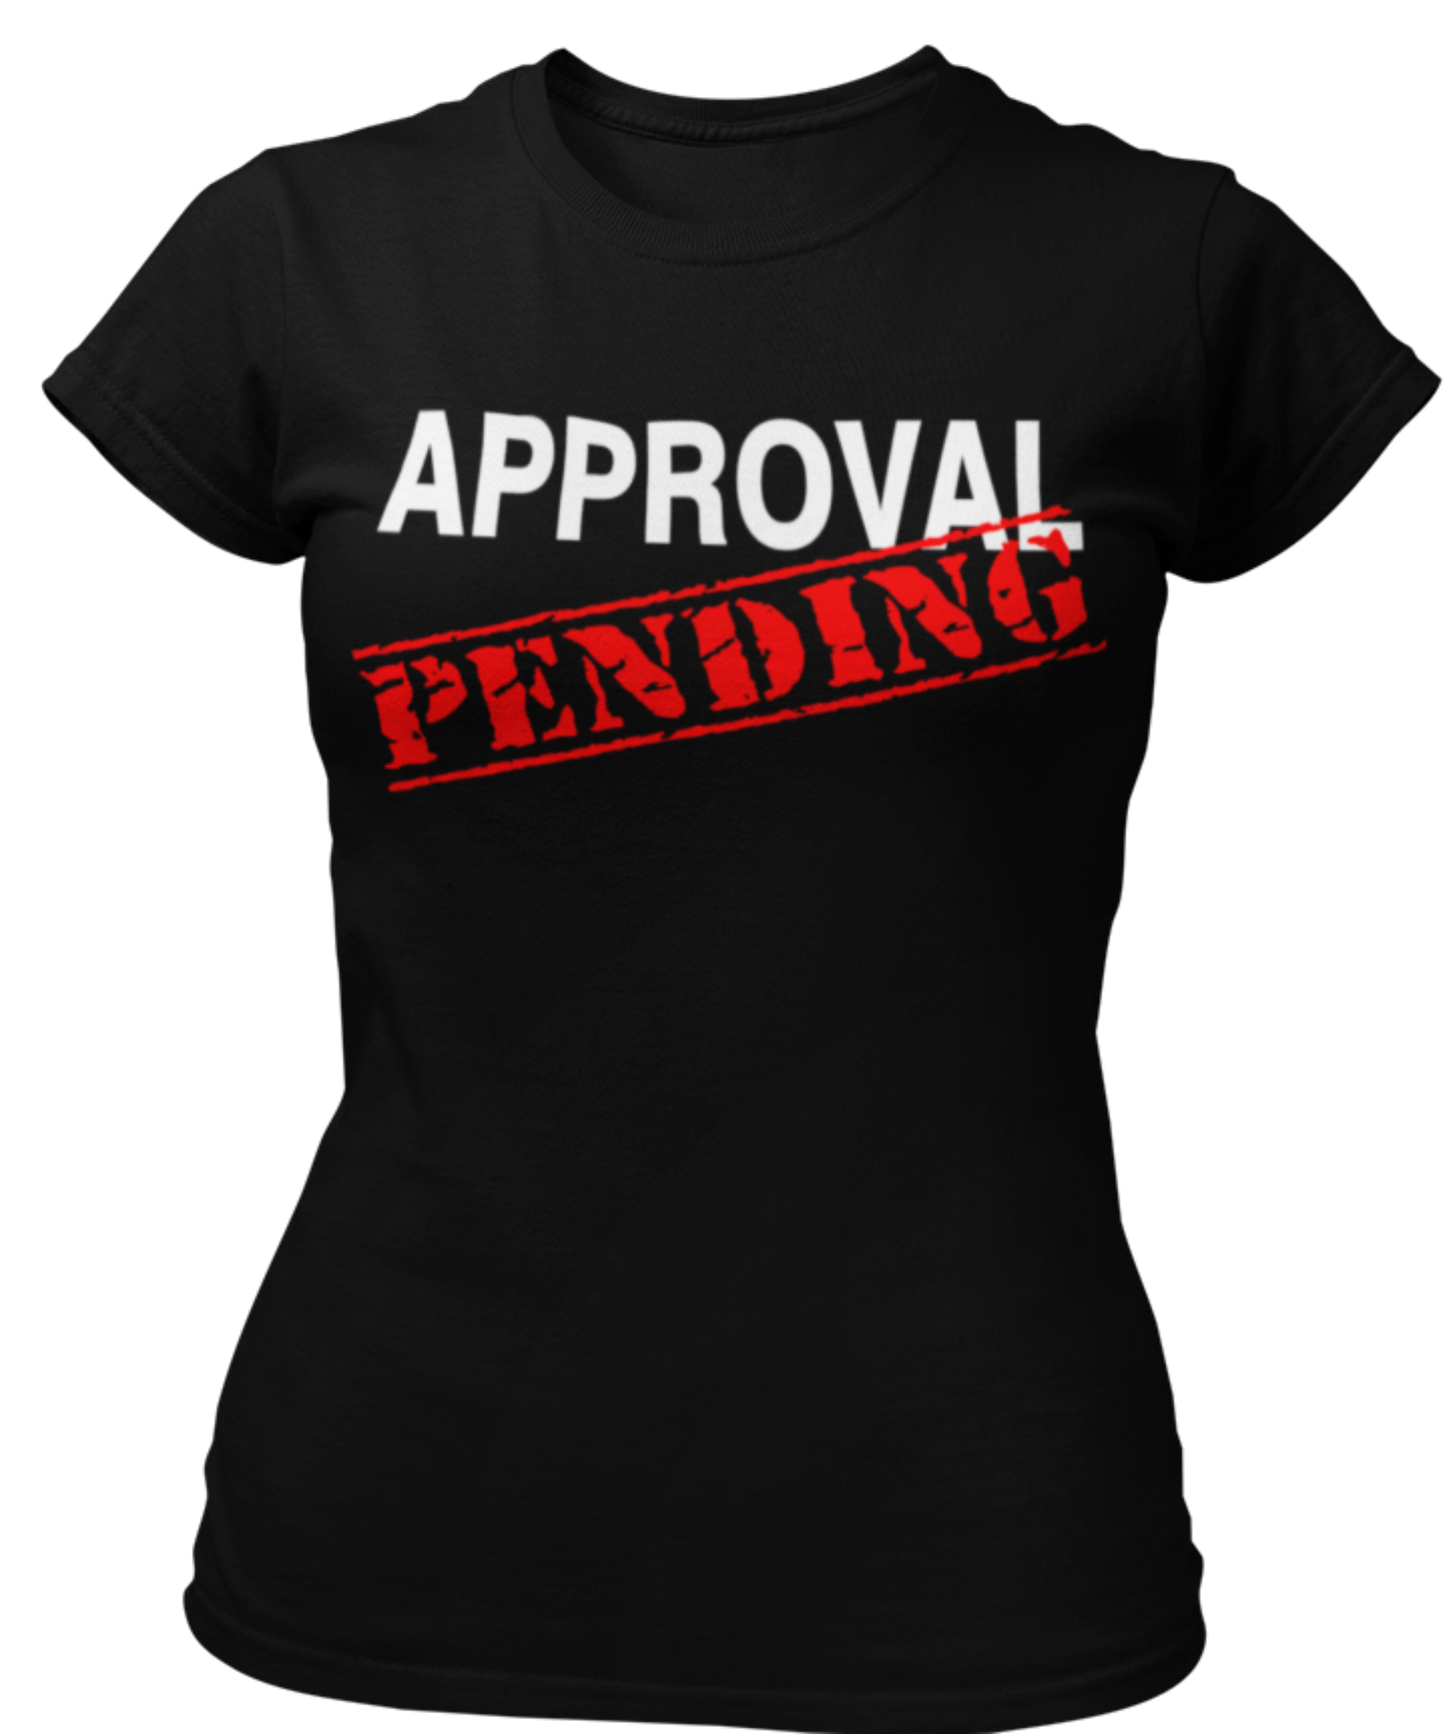 Approval Pending